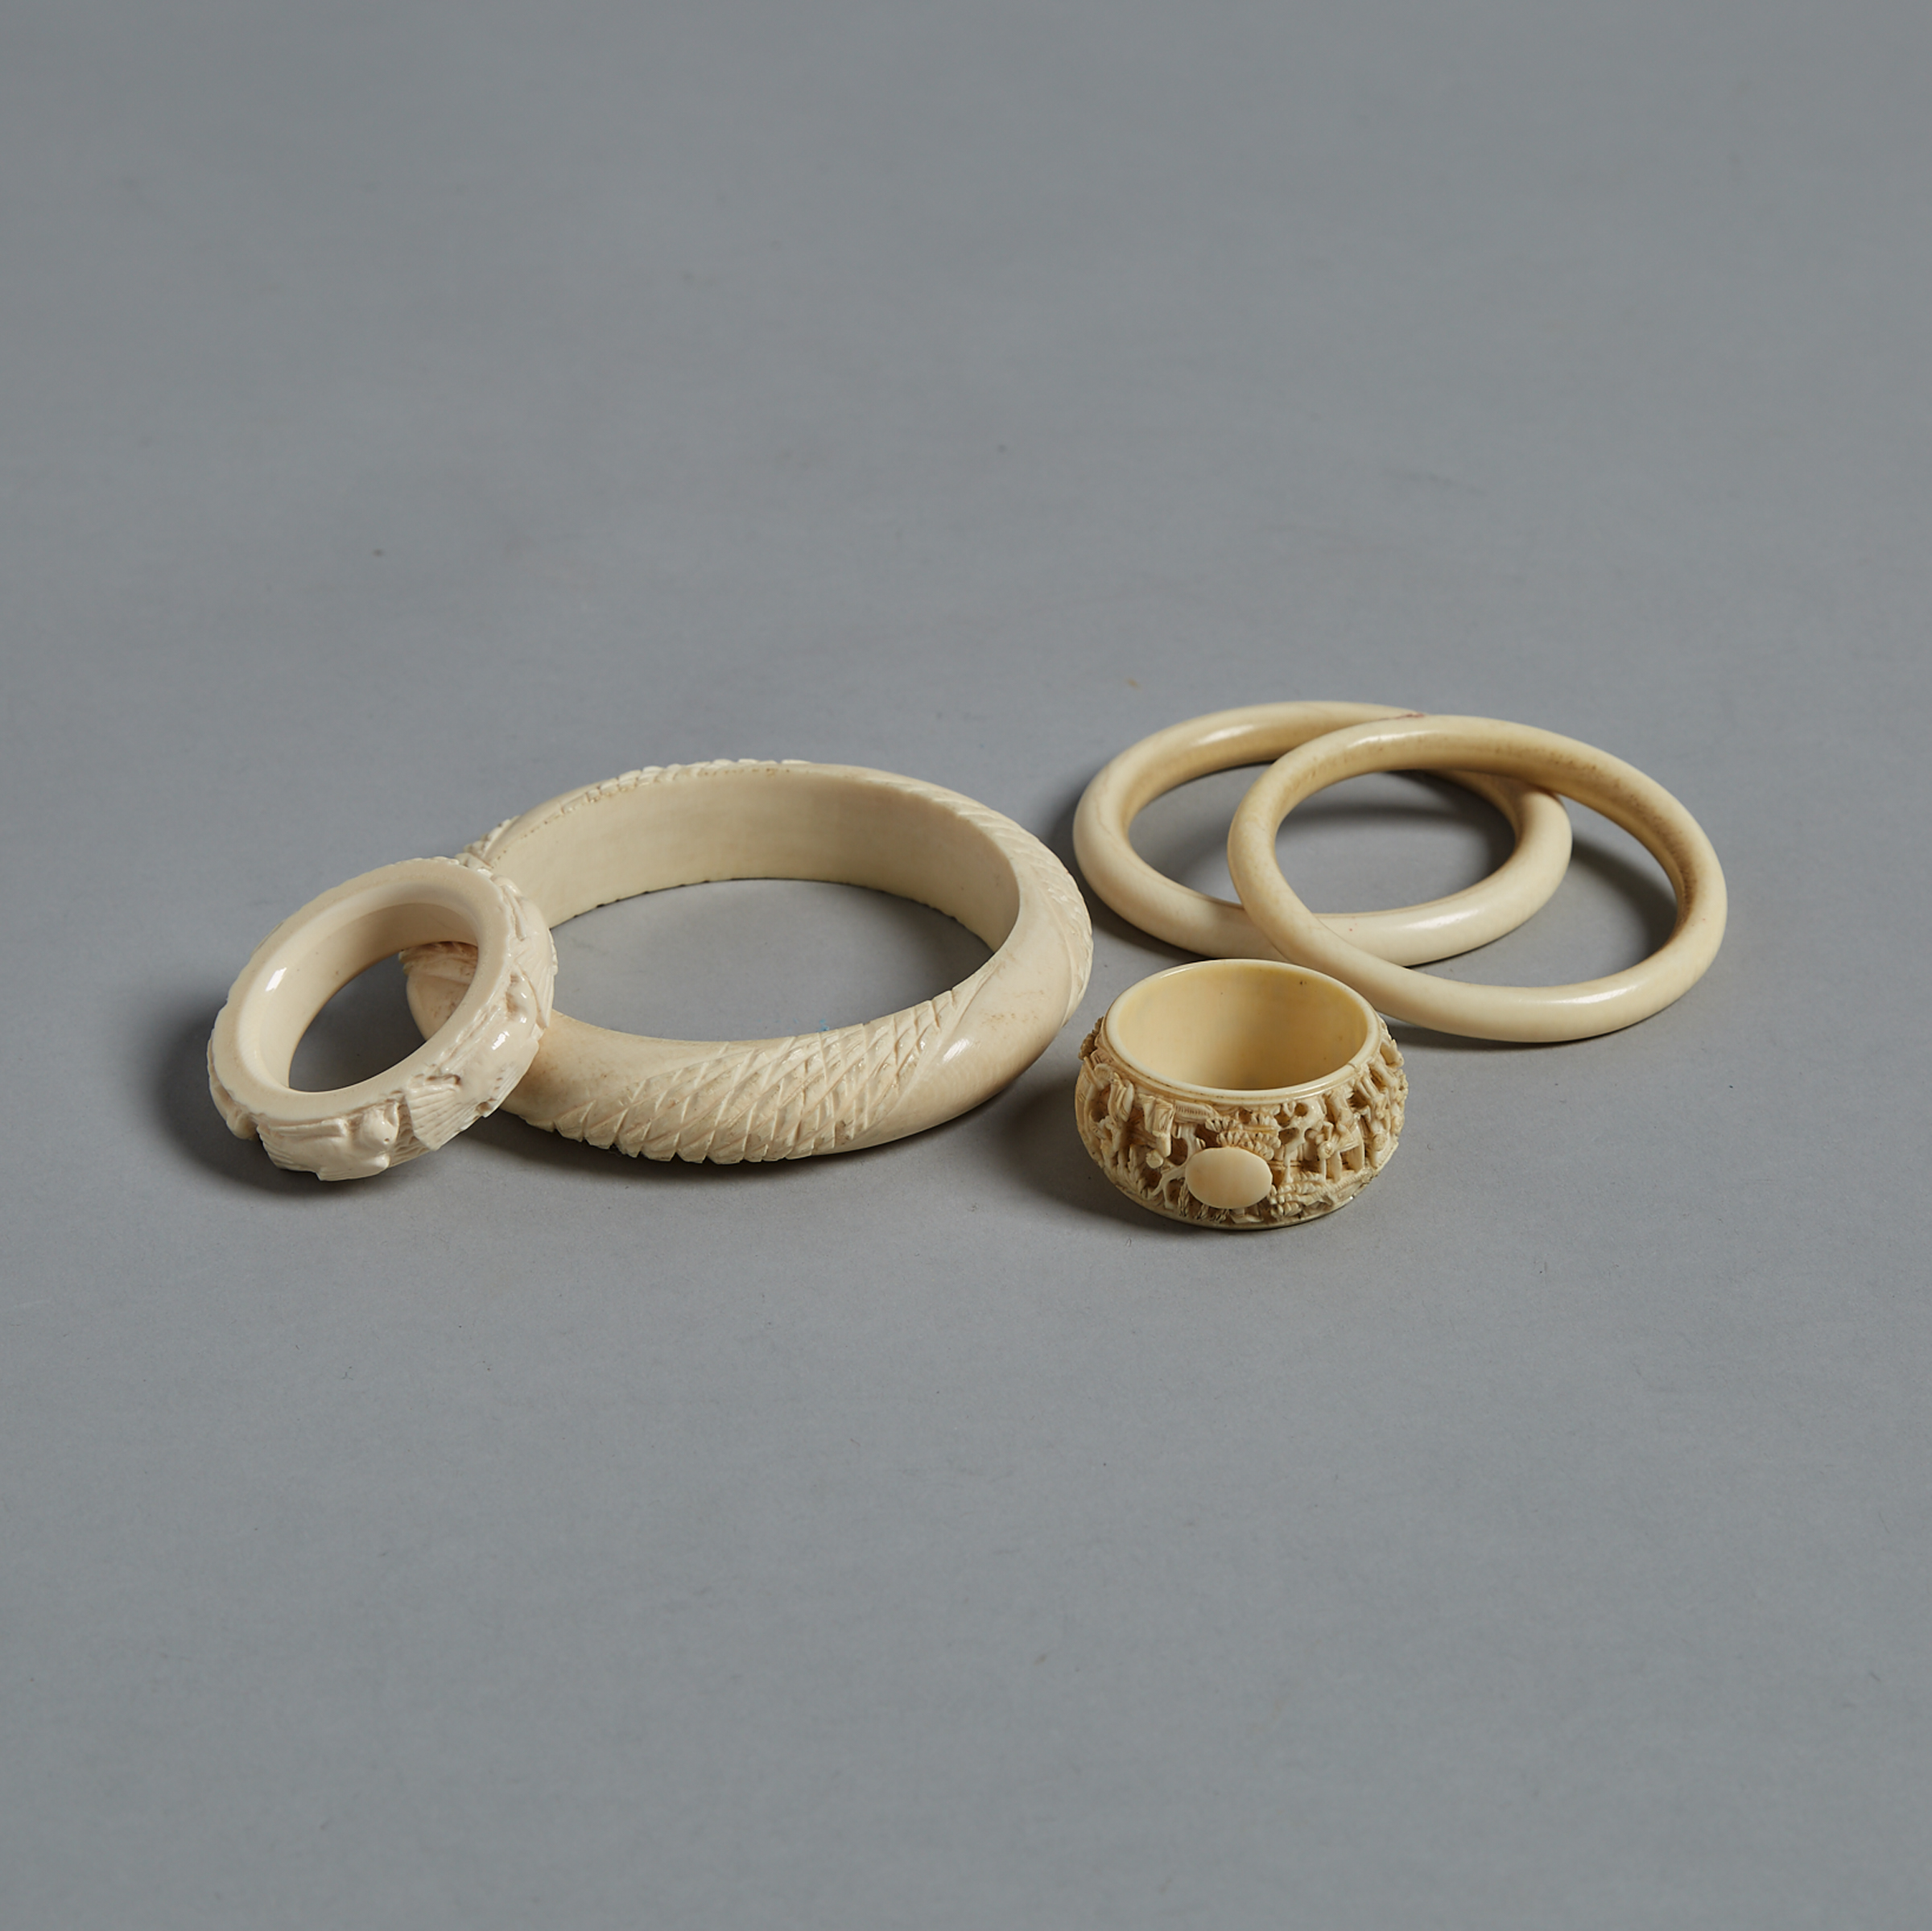 A Group of Five Ivory Carved Bangles, Circa 1940